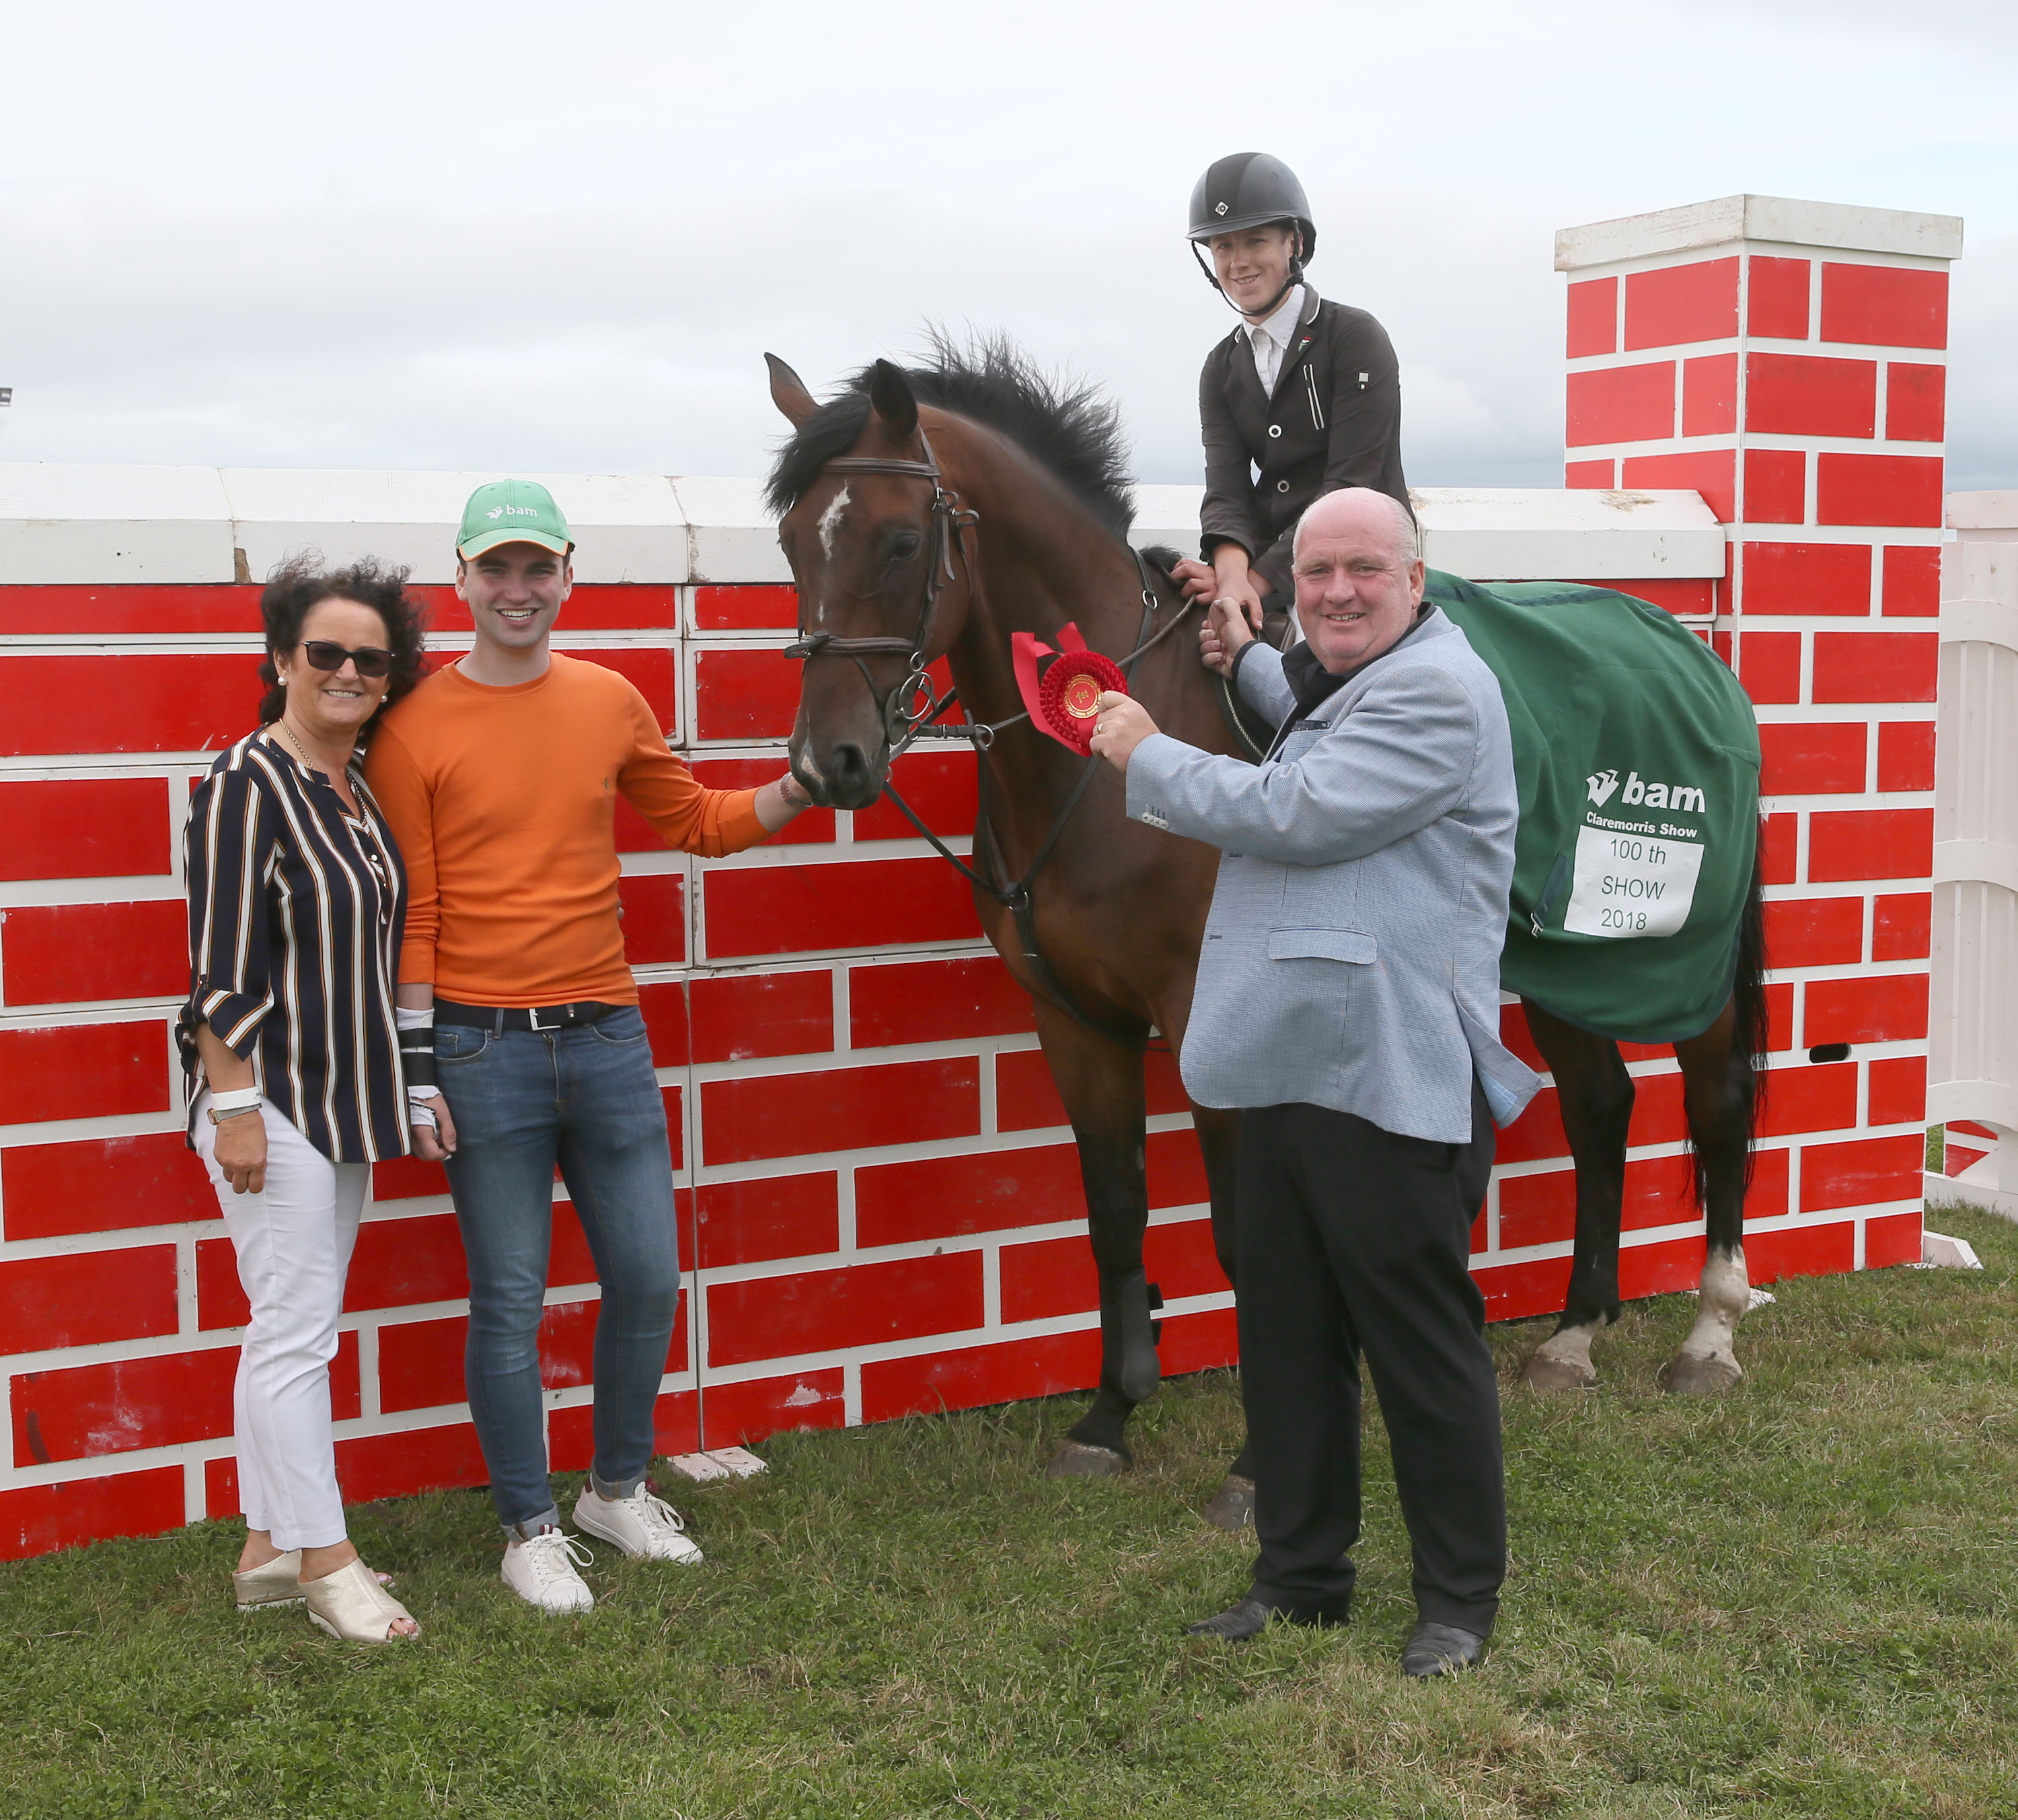 Lee Carey, Crossmolina winner of Puissance at Claremorris 100th Agricultural Show 2018 is presented with rosette by Luke Gibbons, BAM Buildings sponsor included are Francesca and Luke Gibbons, Jnr. Photo: © Michael Donnelly